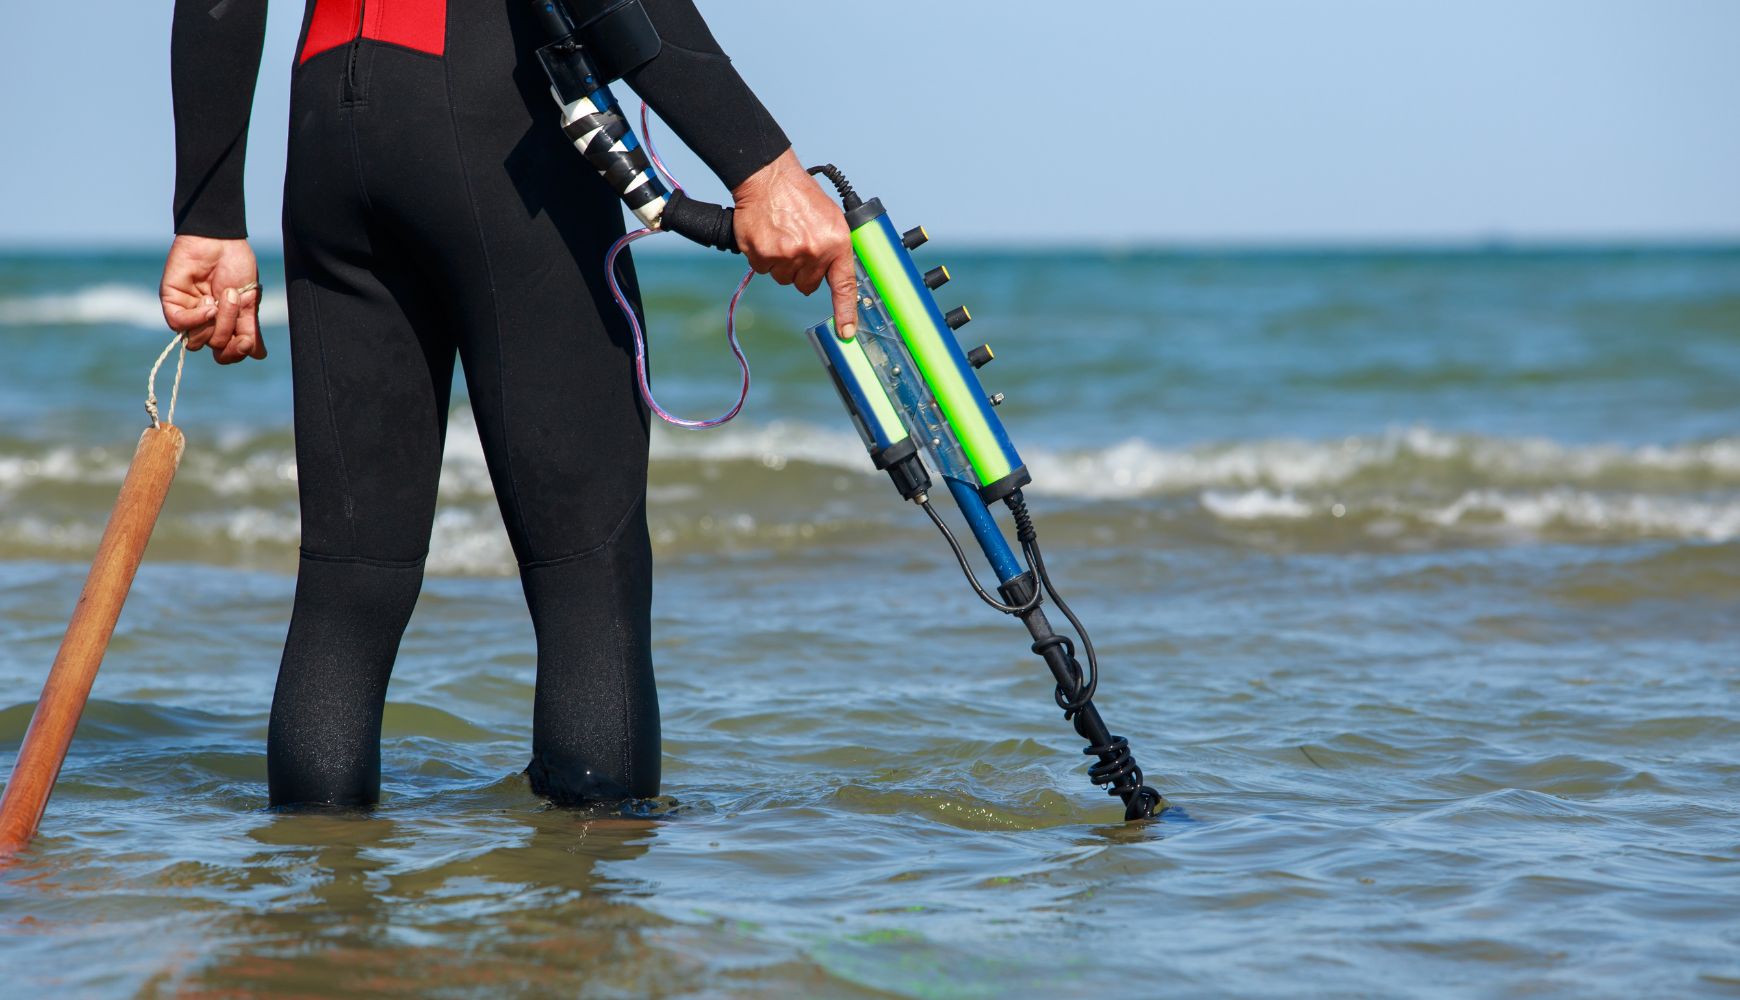 5 Tips for Using a Metal Detector in the Water